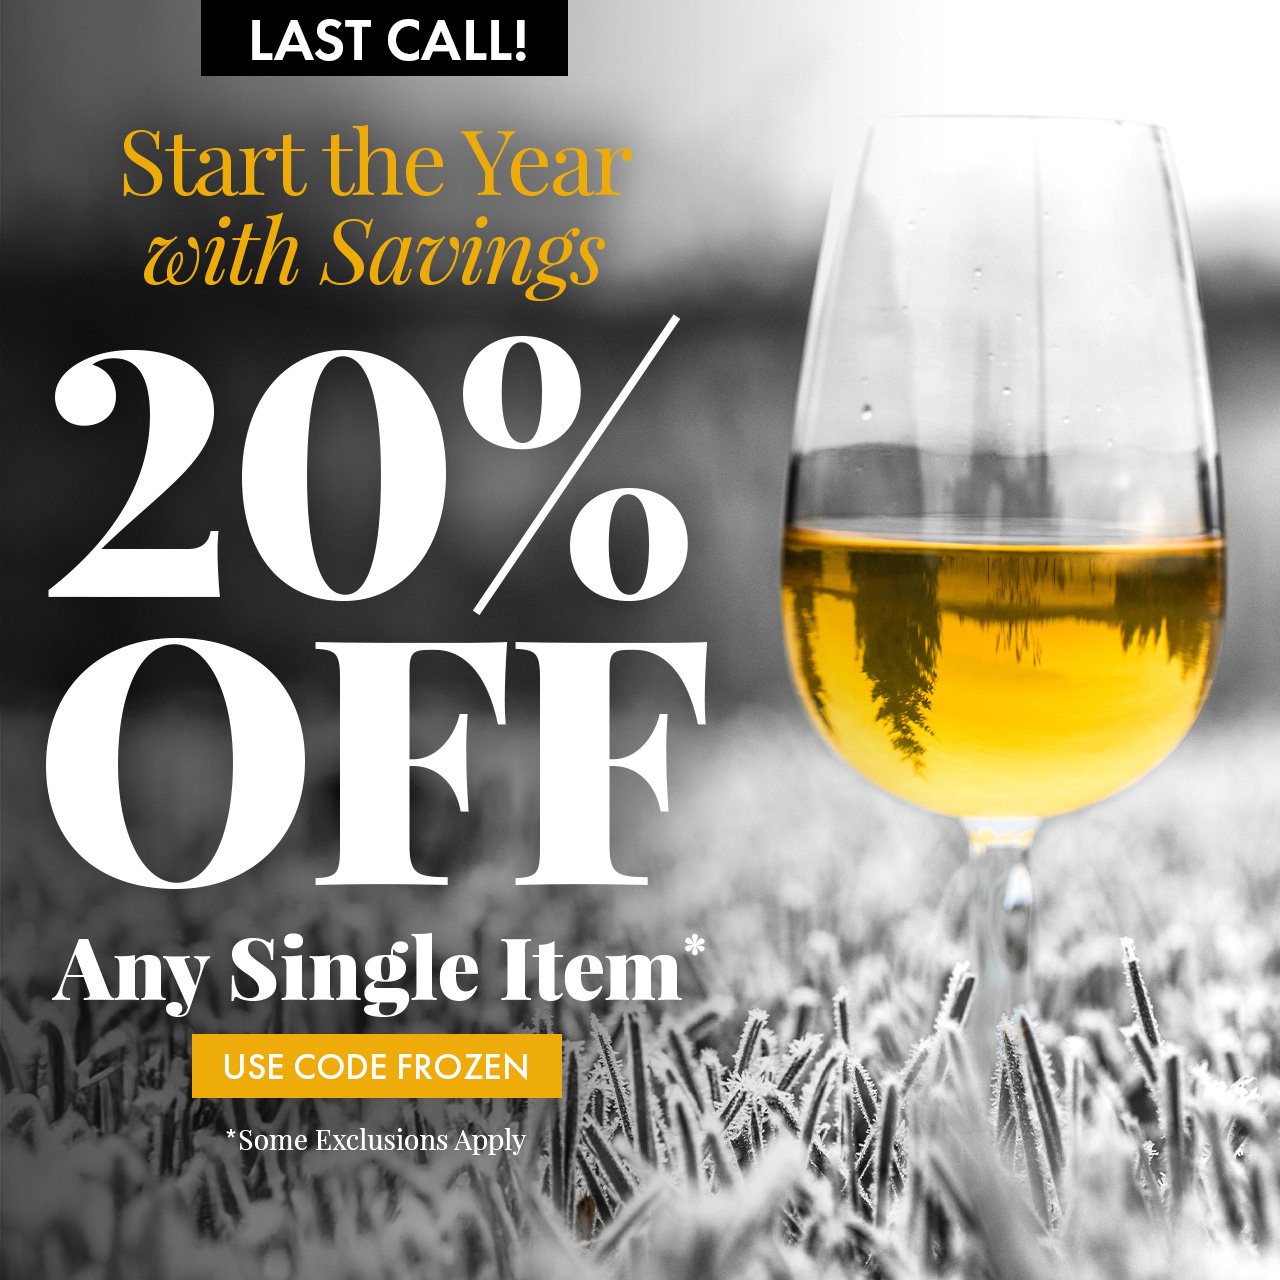 Start the Year with Savings 20% Off a Single Item* Use Code FROZEN Some exclusions apply.